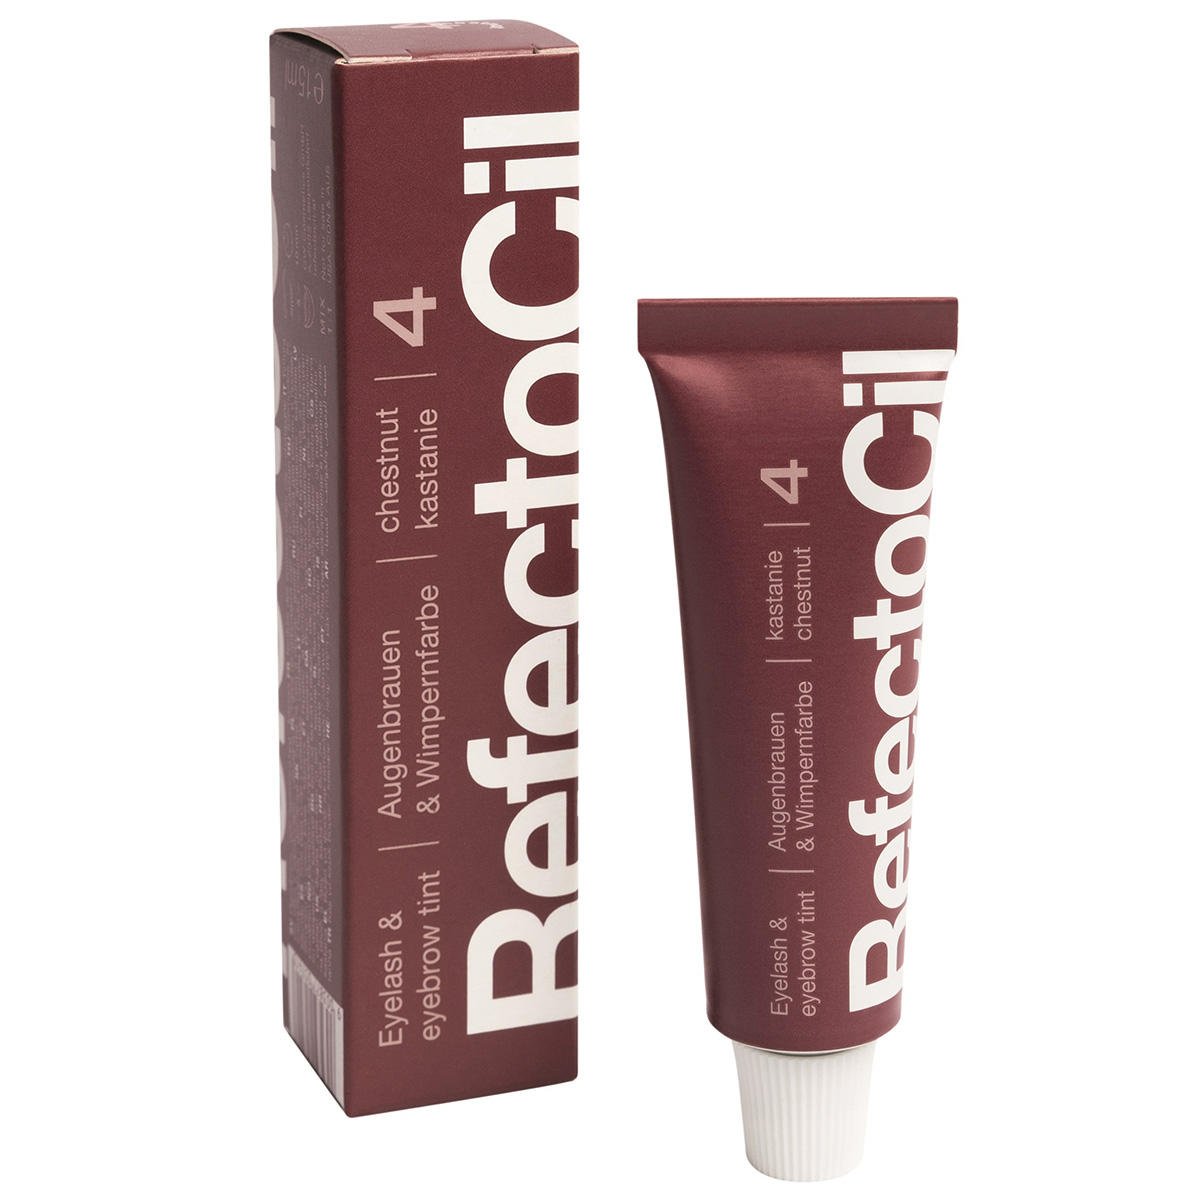 RefectoCil Eyebrow and eyelash color Chestnut, content 15 ml